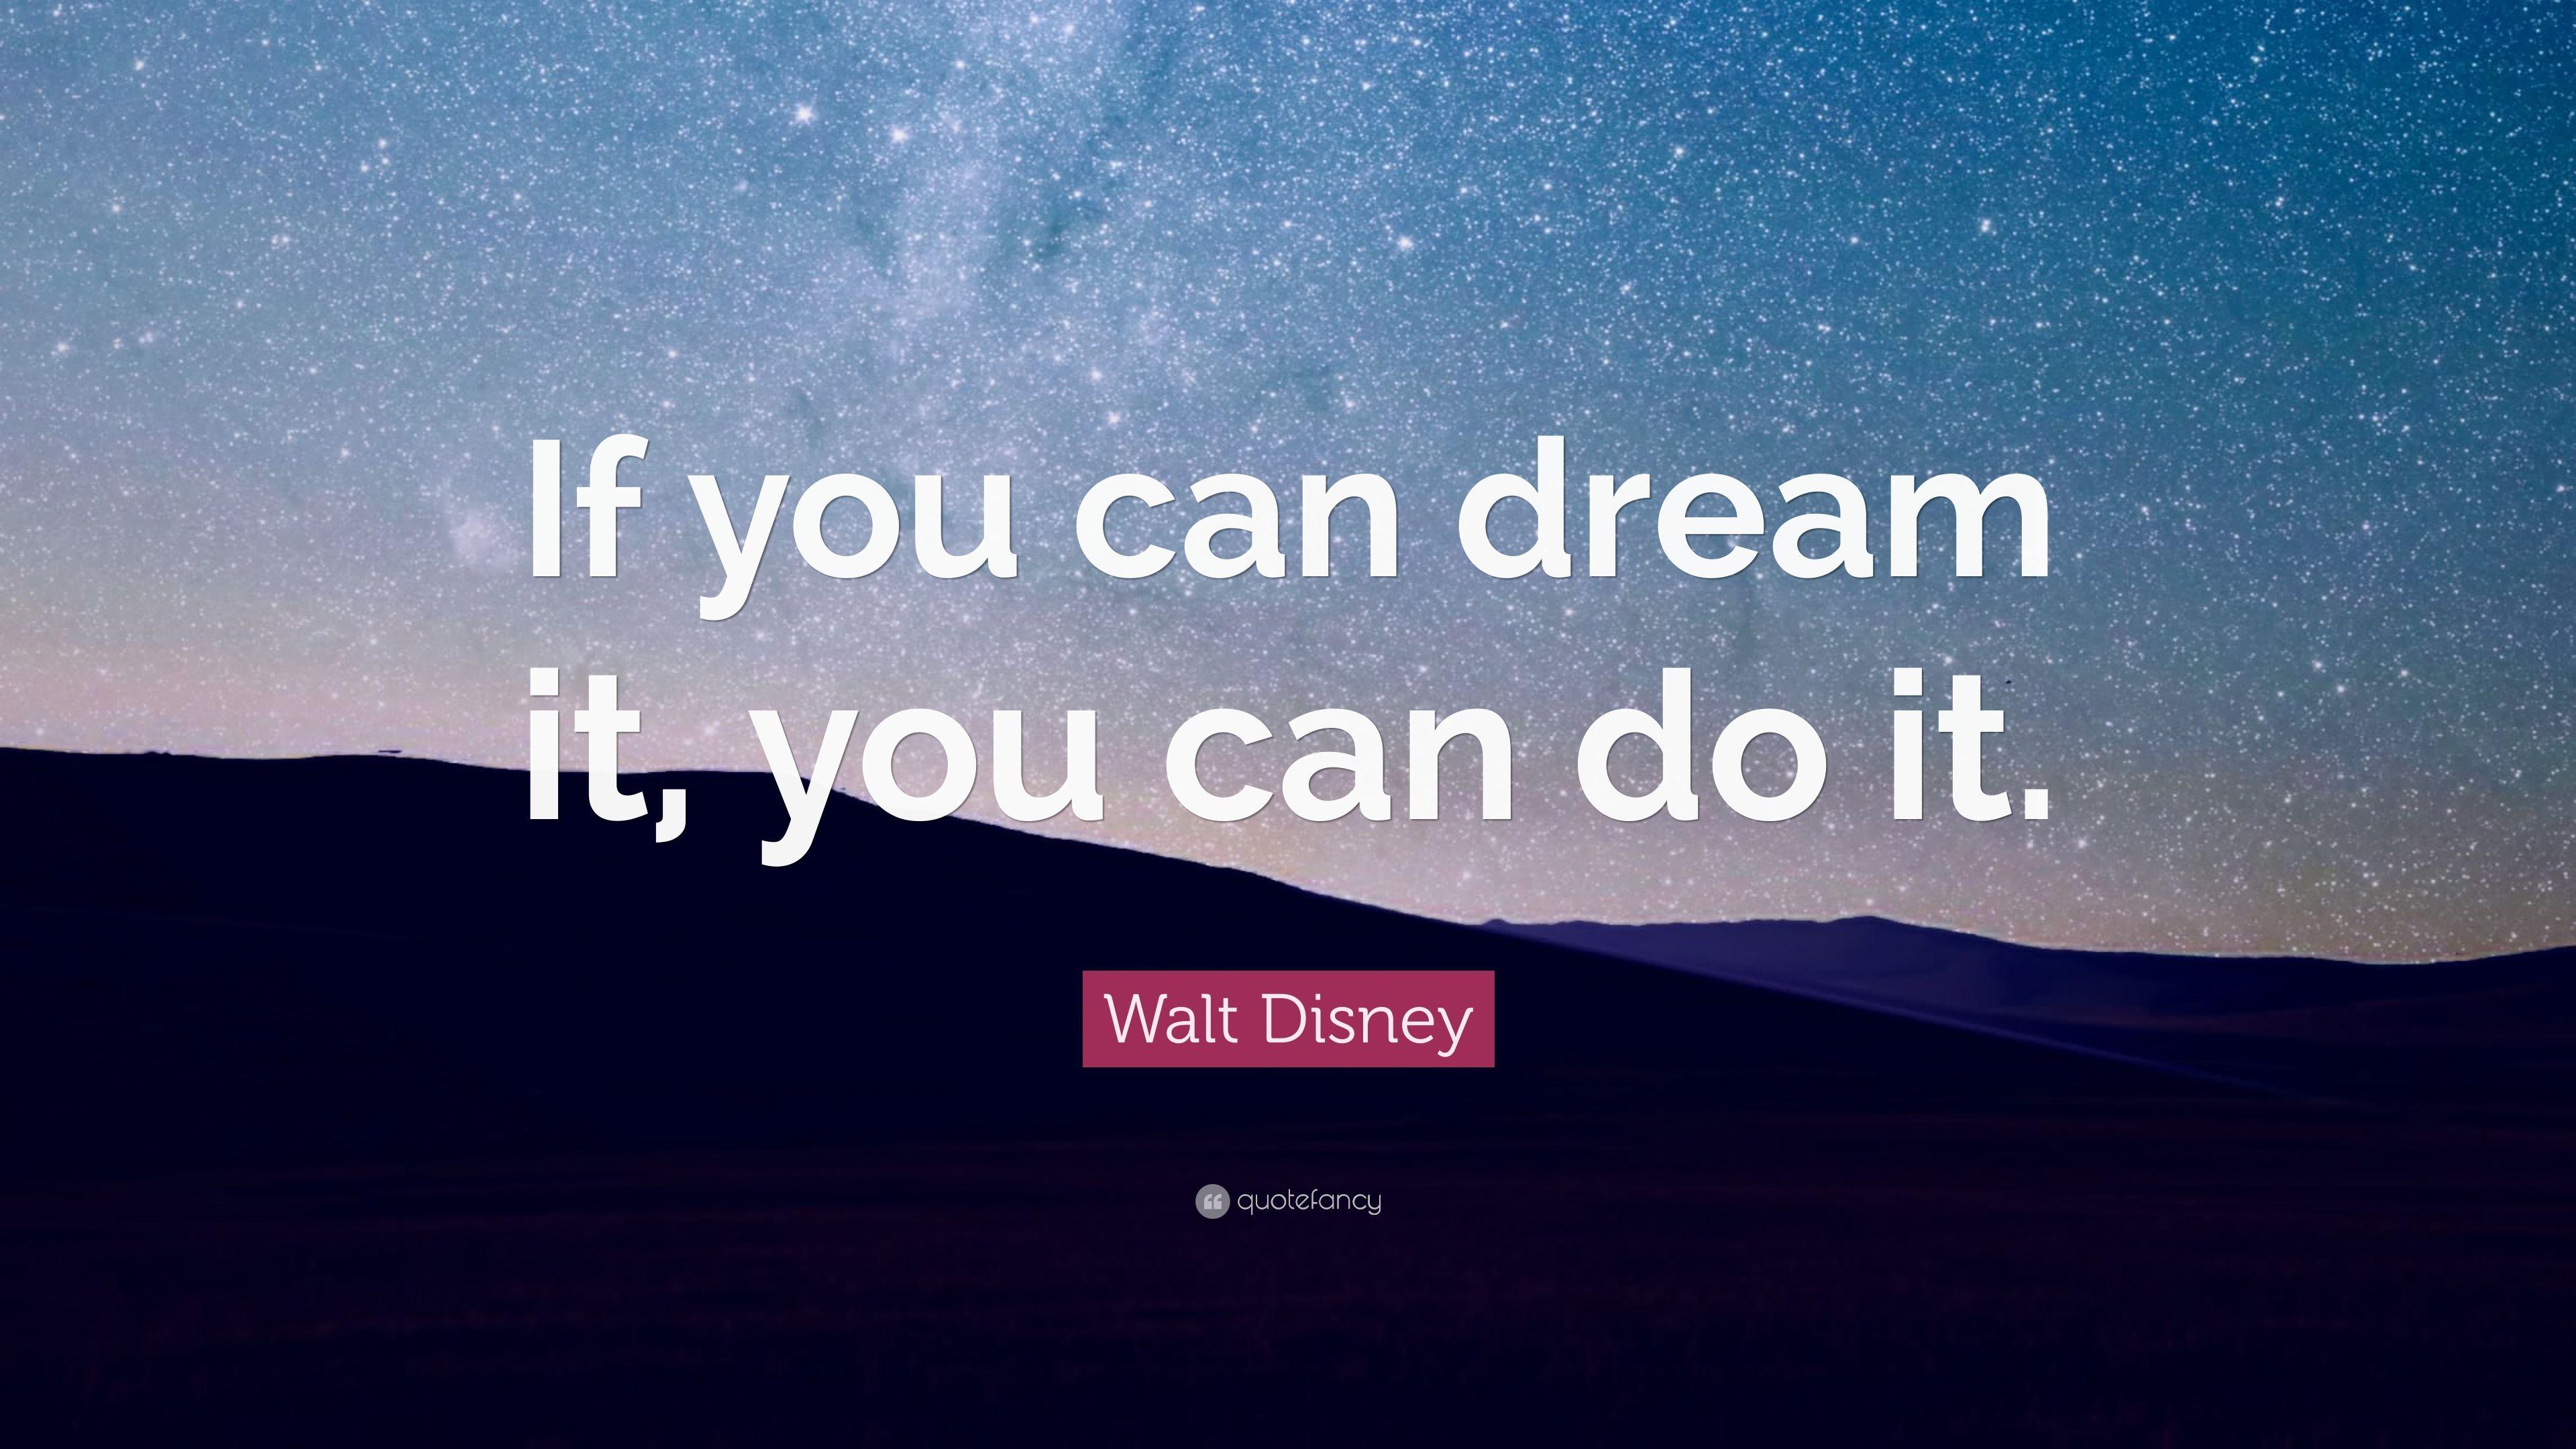 Walt Disney Quote: “If you can dream it, you can do it.”